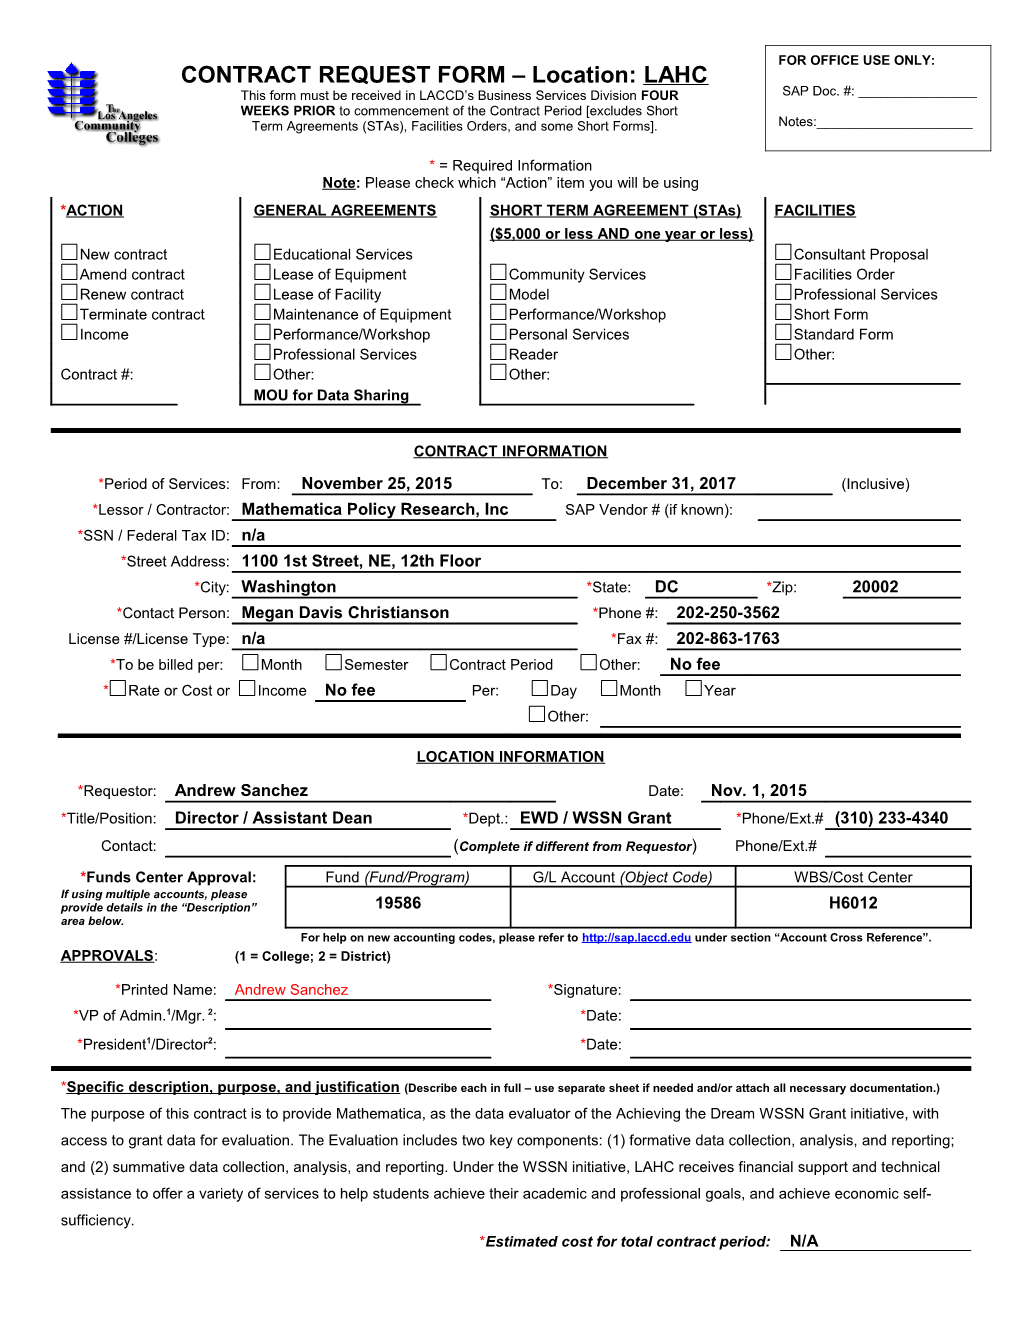 This Form Must Be Received in LACCD S Business Services Division FOUR WEEKS PRIOR To